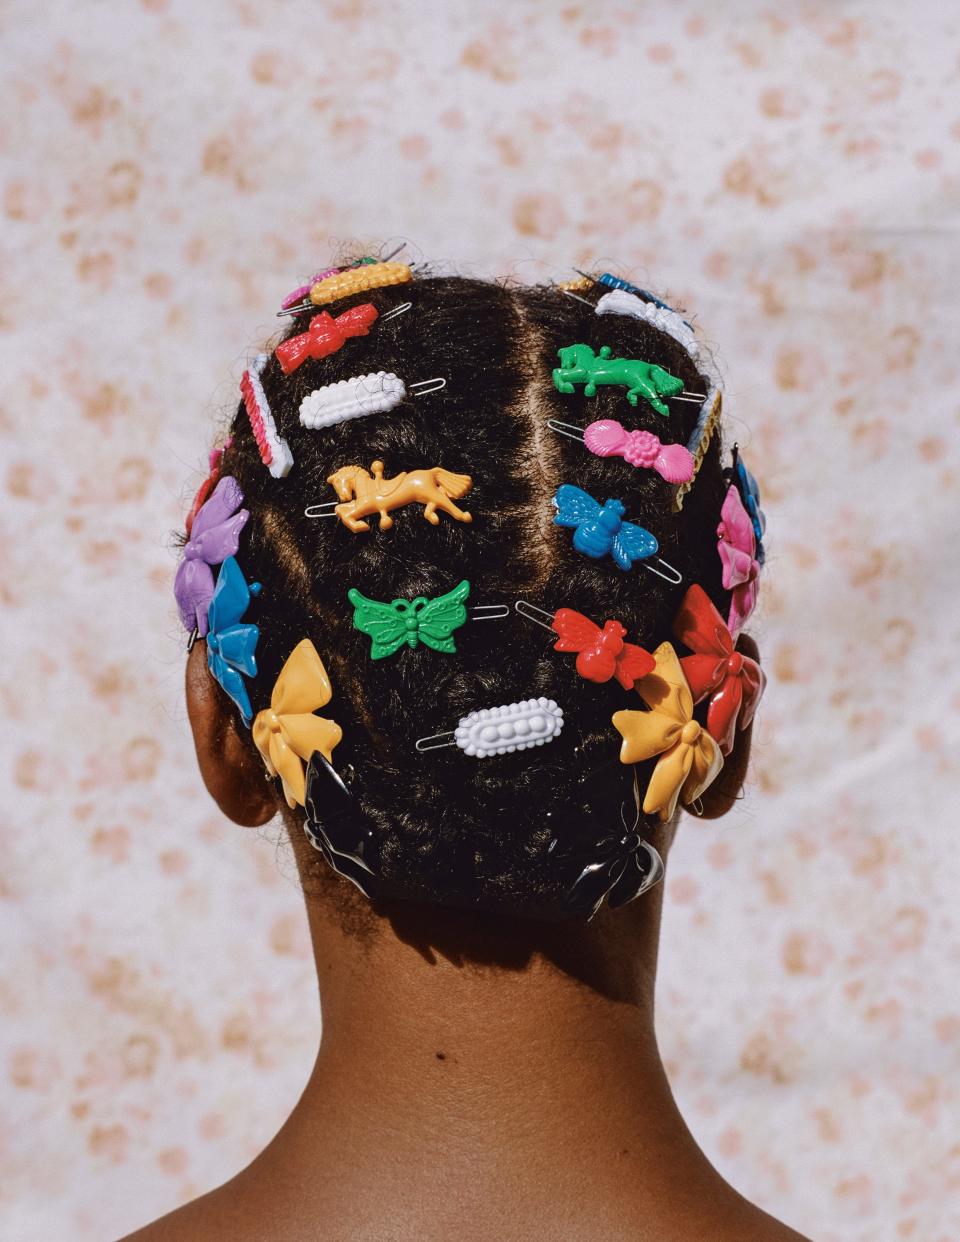 Micaiah Carter’s “Adeline in Barrettes,” a 2018 image on display at the Sarasota Art Museum in the exhibit “The New Black Vanguard: Photography between Art and Fashion.”